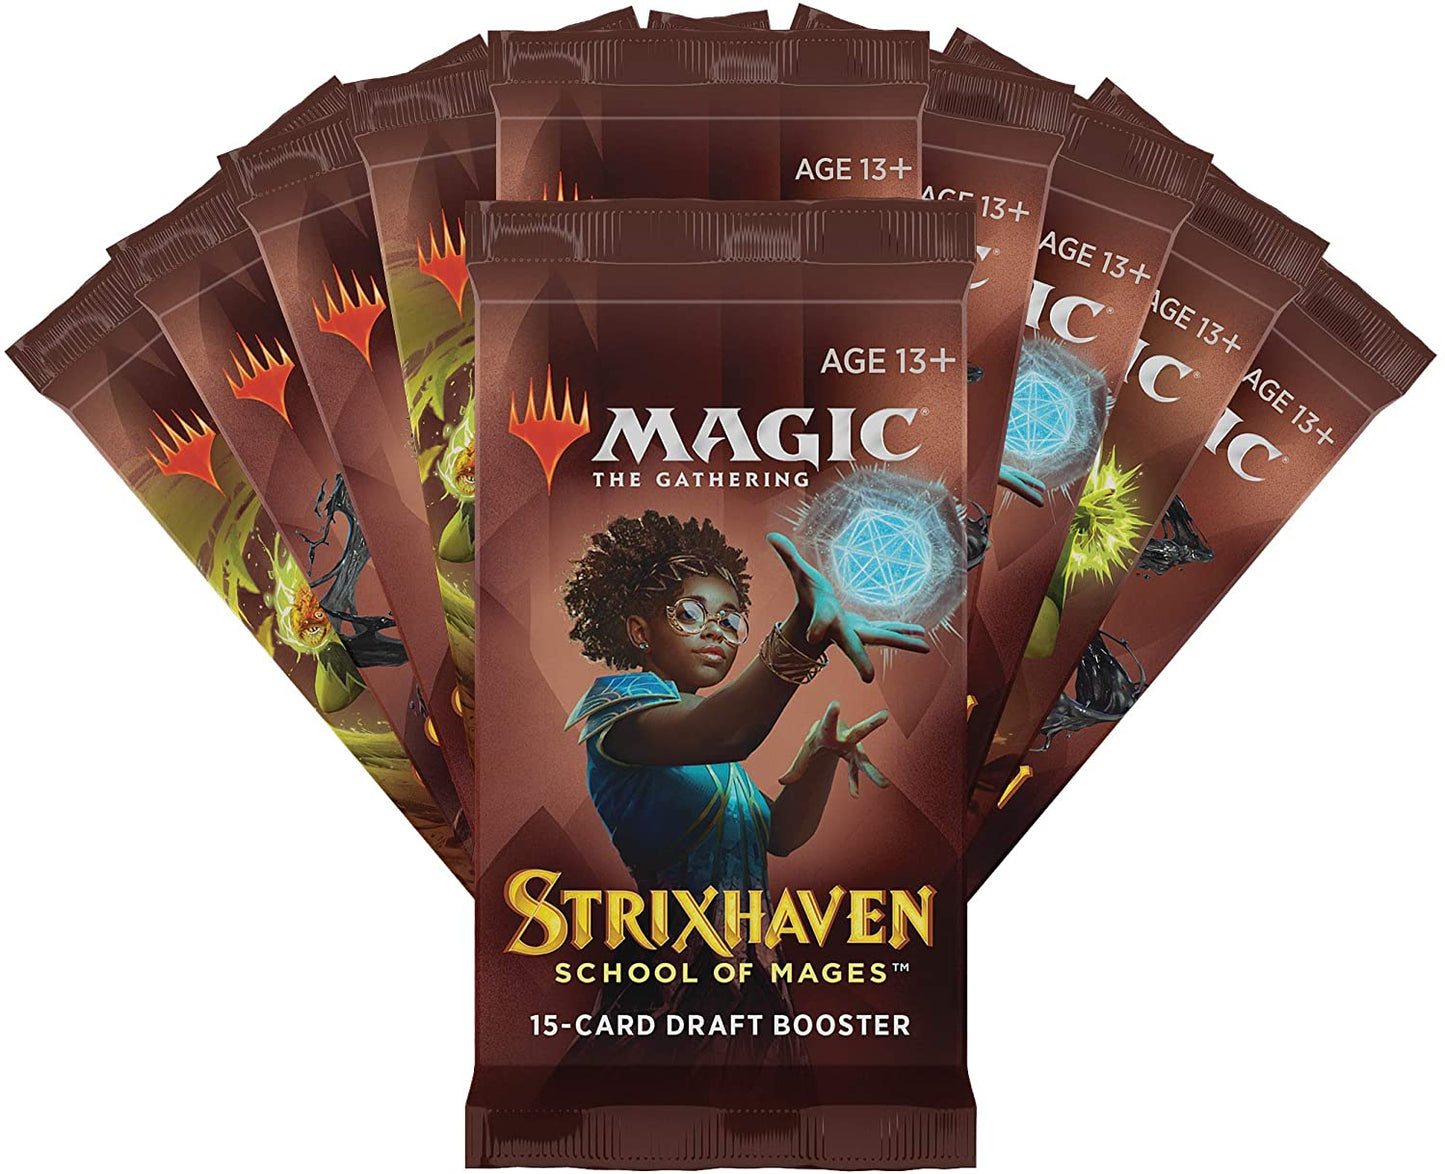 Magic The Gathering Strixhaven Bundle | 10 Draft Boosters (150 Magic Cards) + Accessories